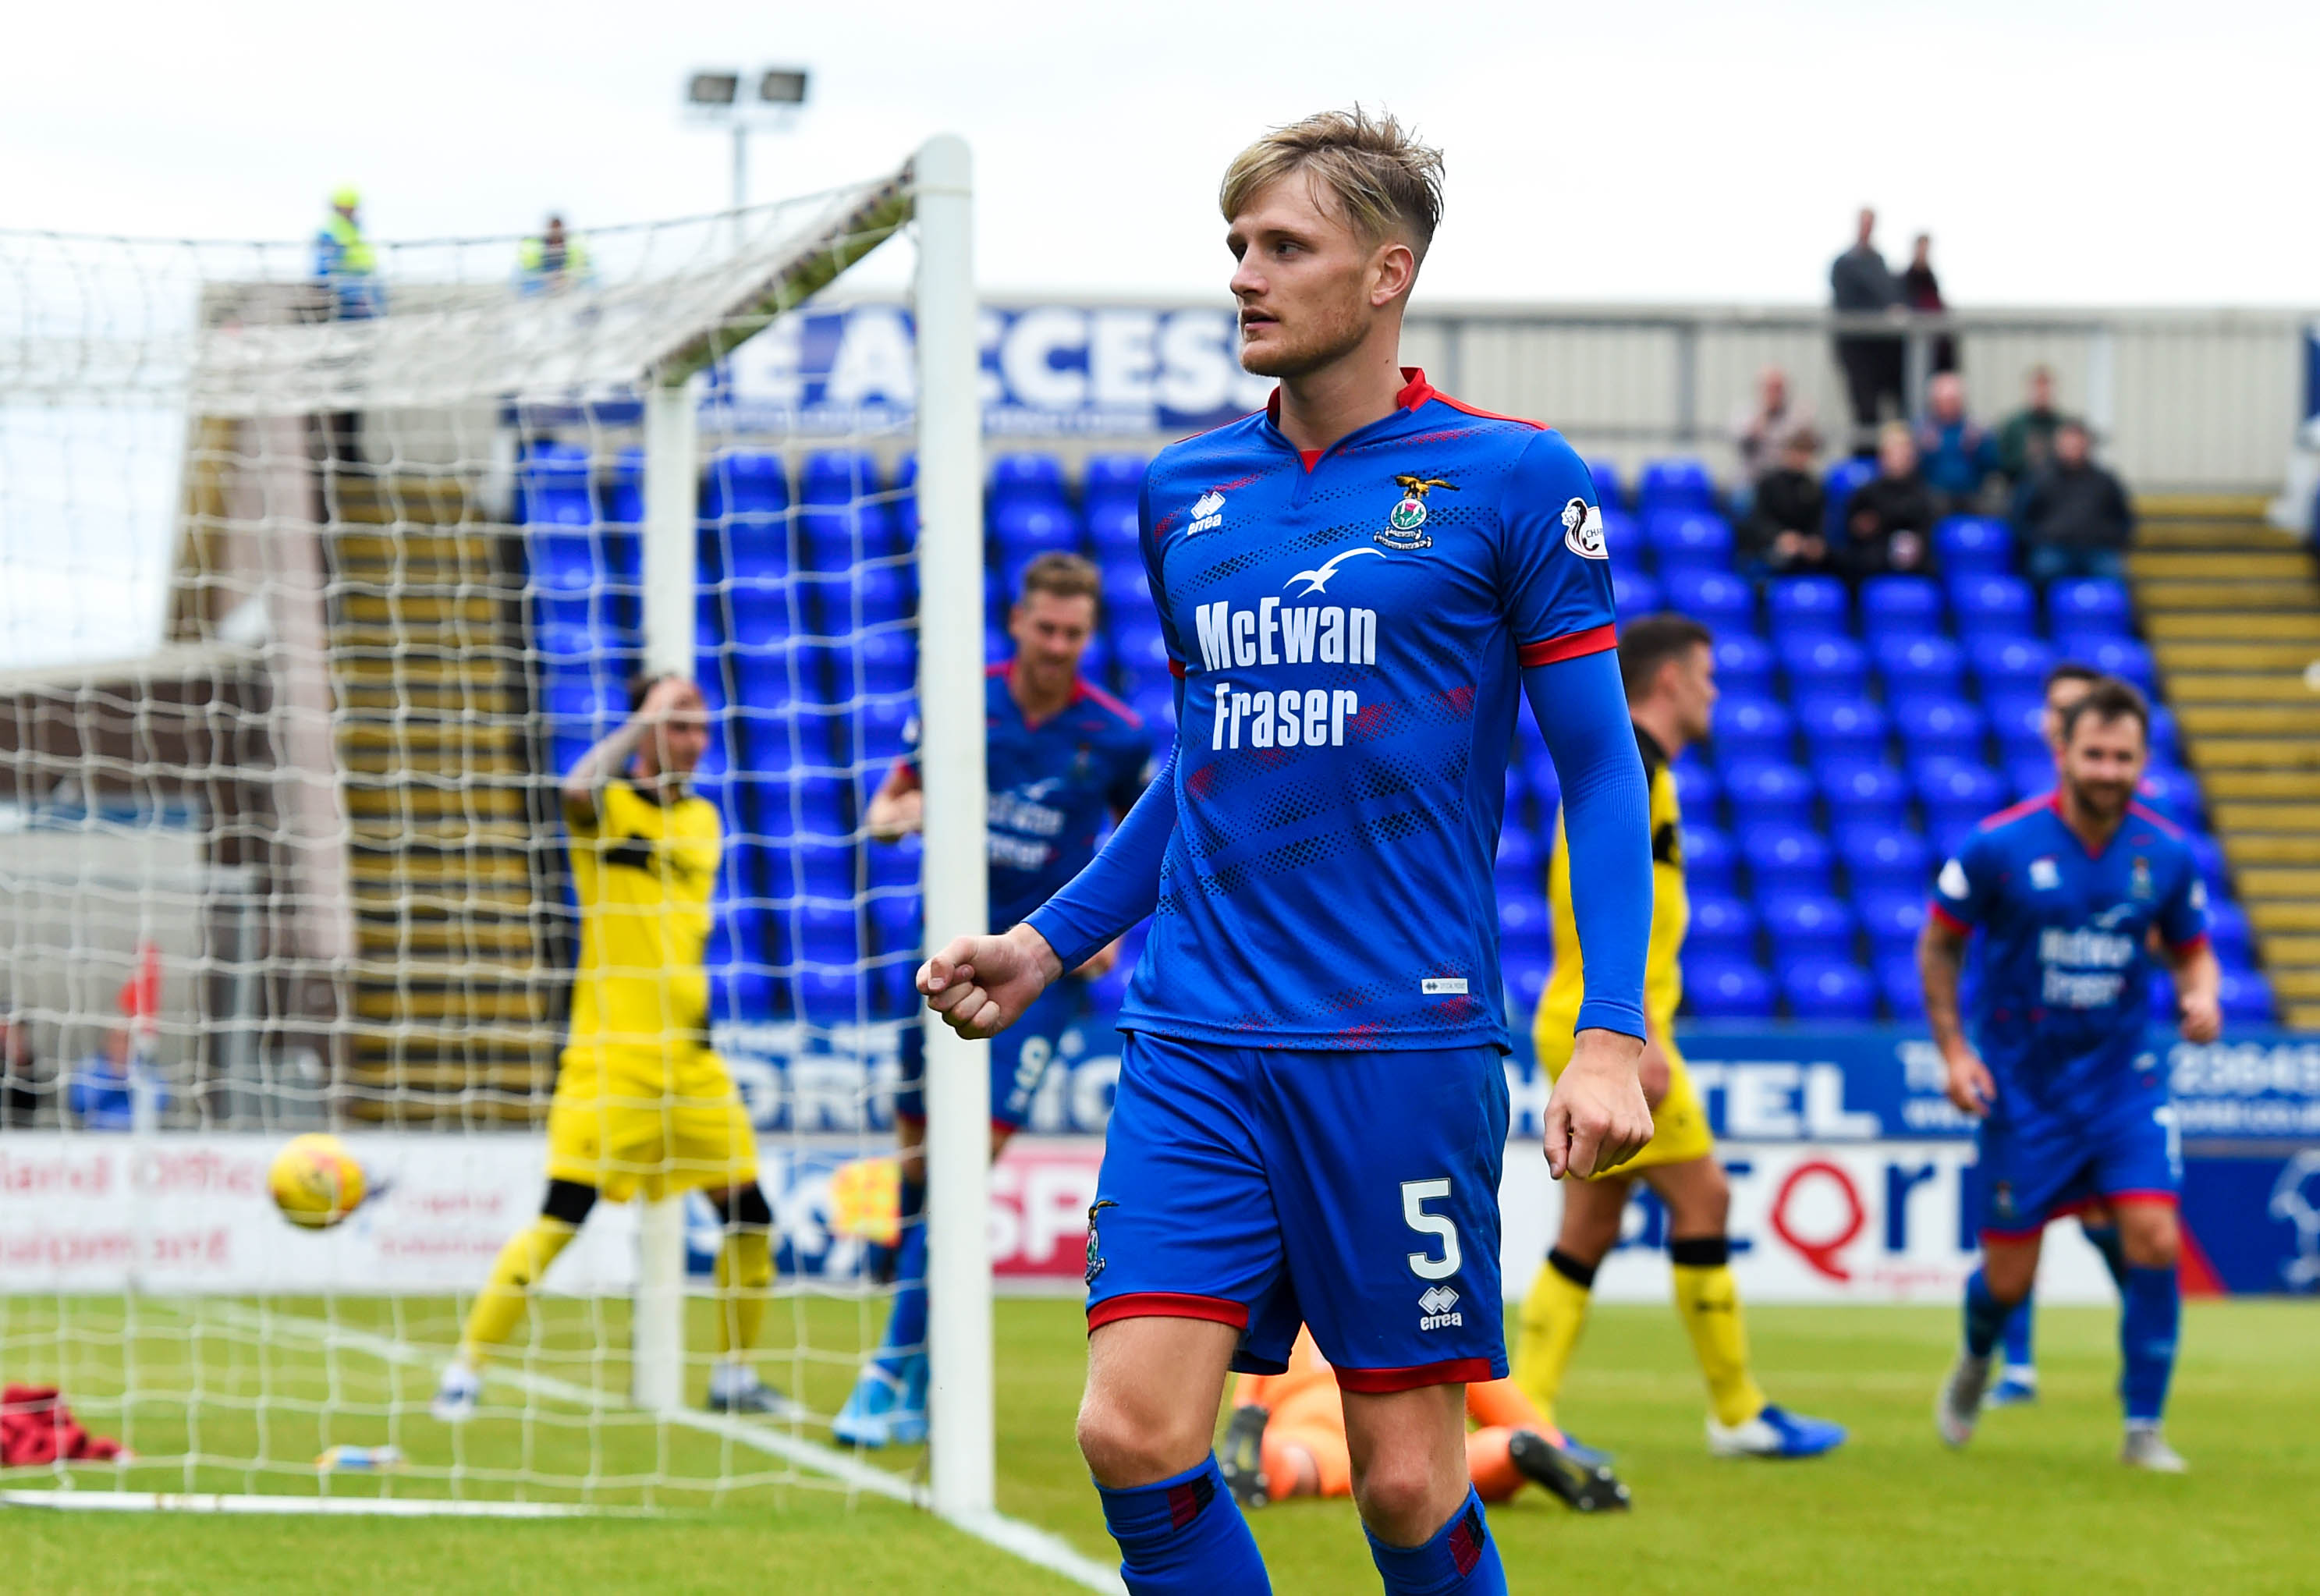 20/07/2019 BETFRED CUP GROUP D
INVERNESS CT v RAITH ROVERS
TULLOCH CALEDONIAN STADIUM - INVERNESS
Inverness' Coll Donaldson celebrates his goal